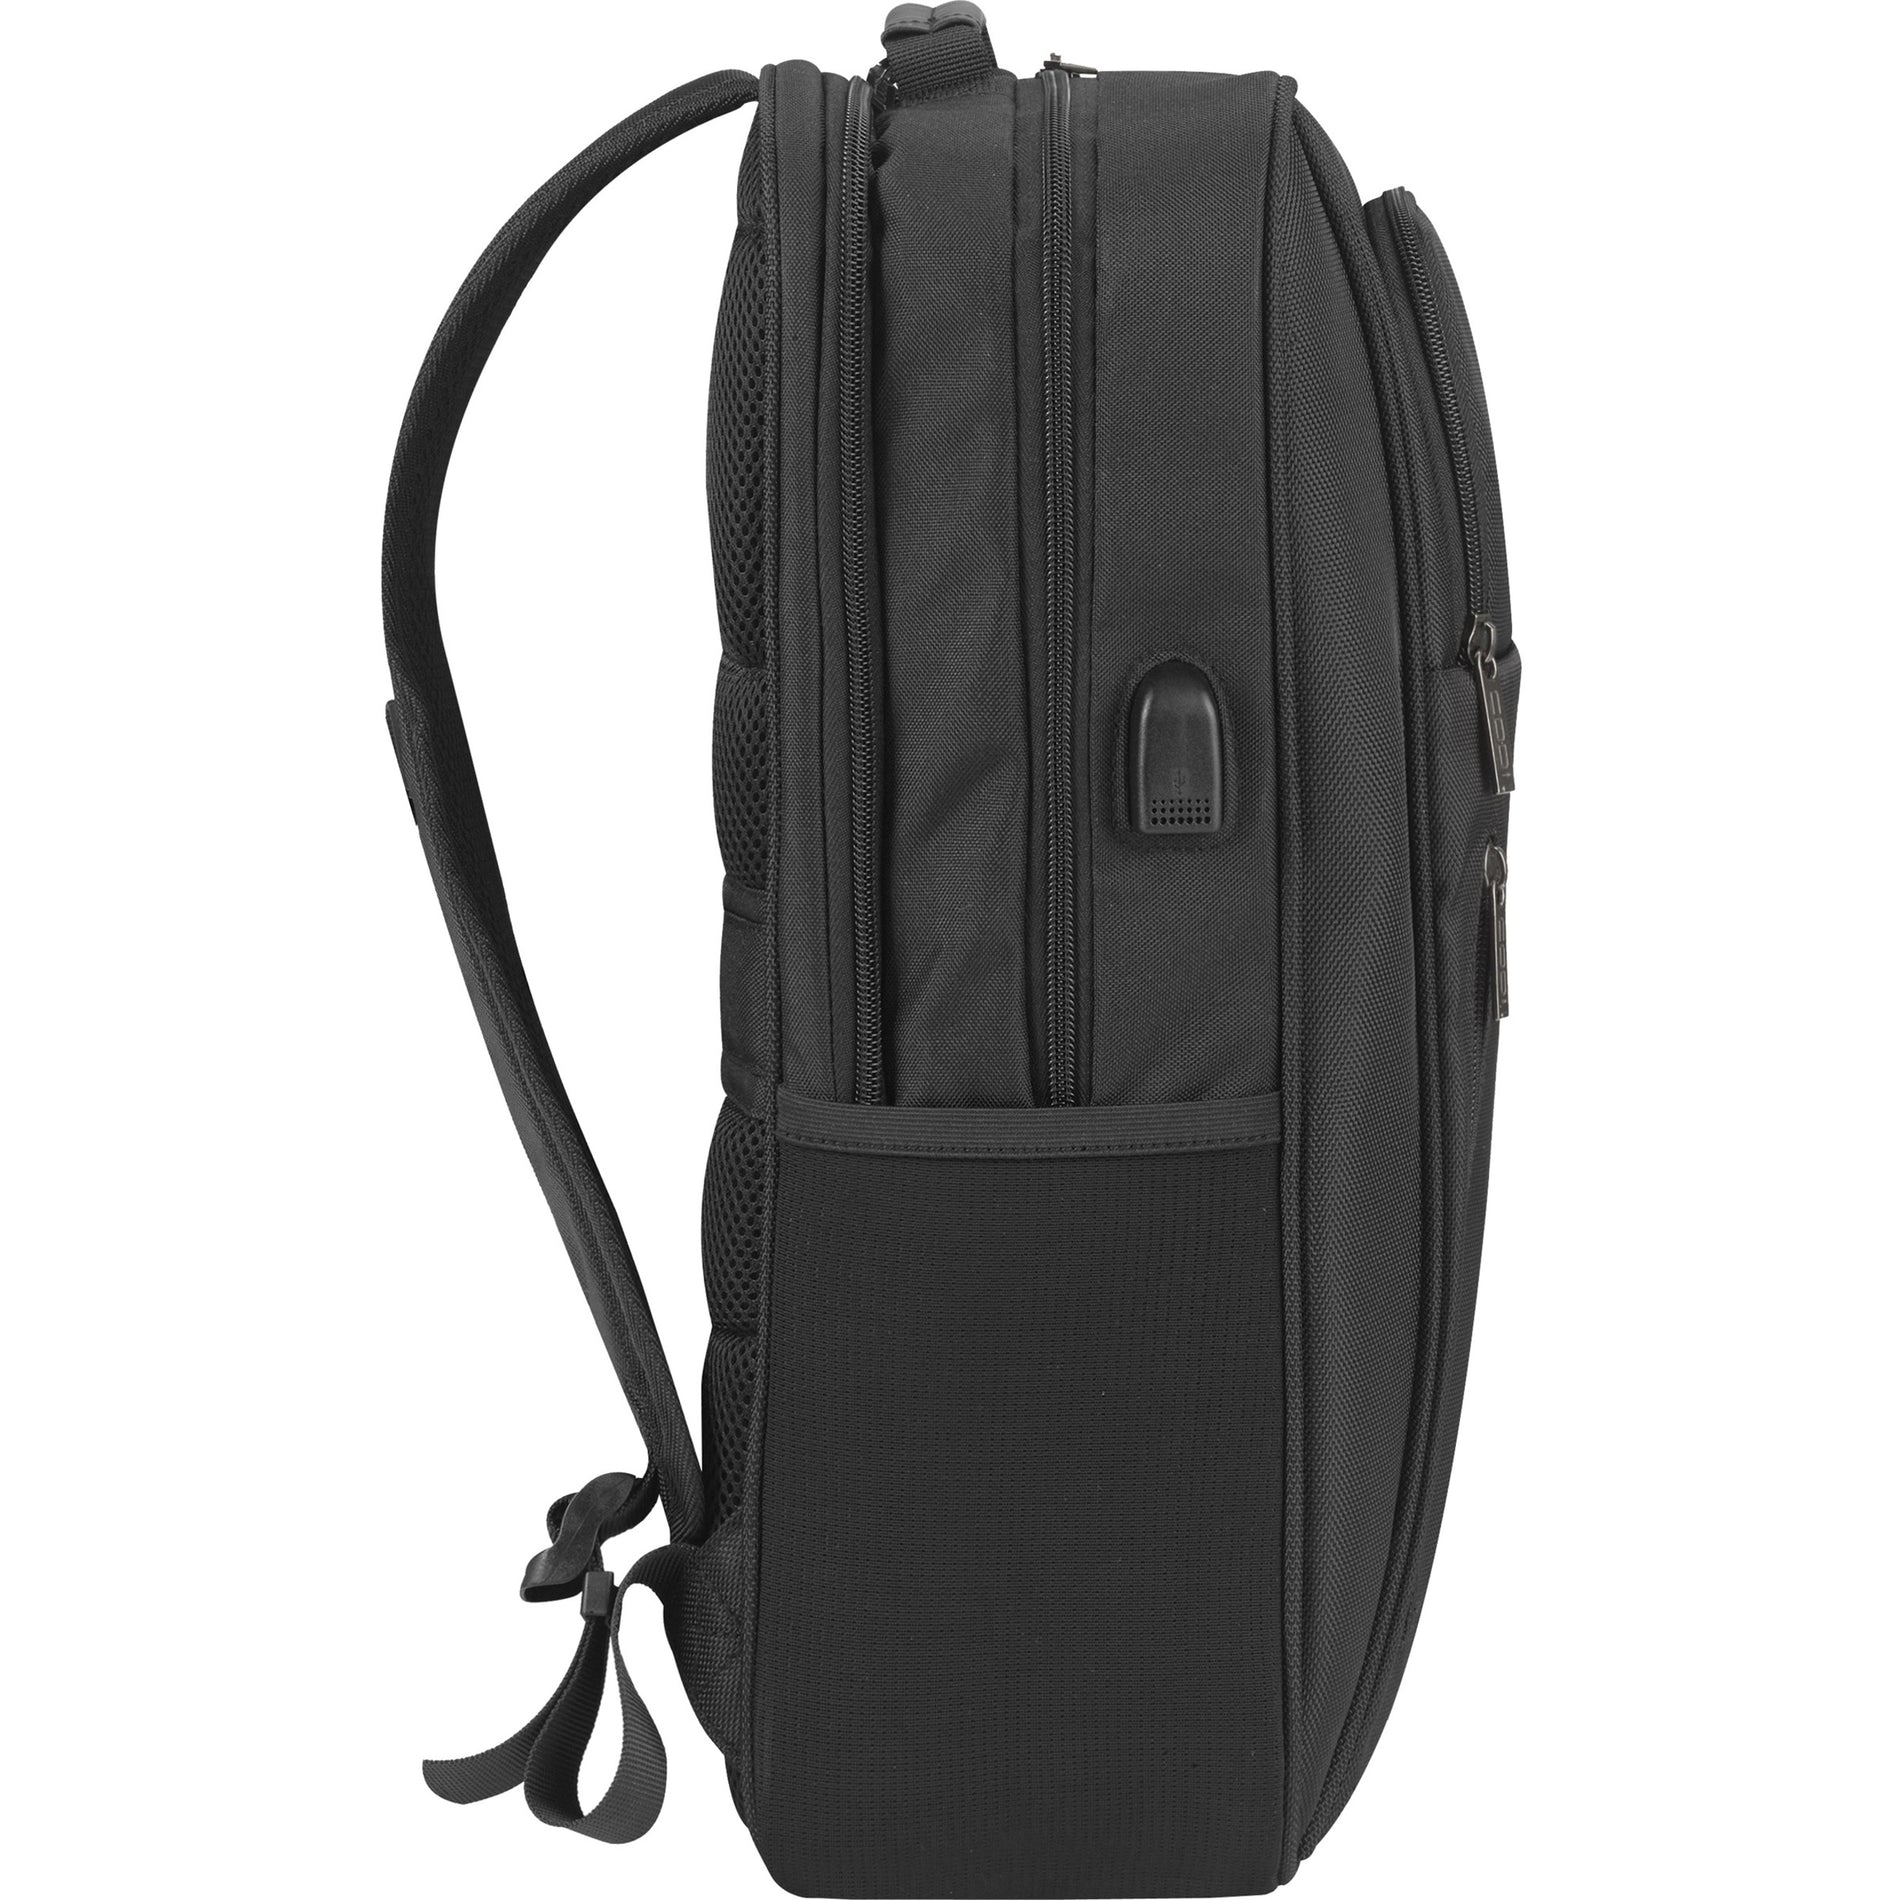 CODi MAG702-4 Magna 17.3" Backpack, Water Bottle, Key, Power Bank, Tablet, Notebook, Checkpoint Friendly